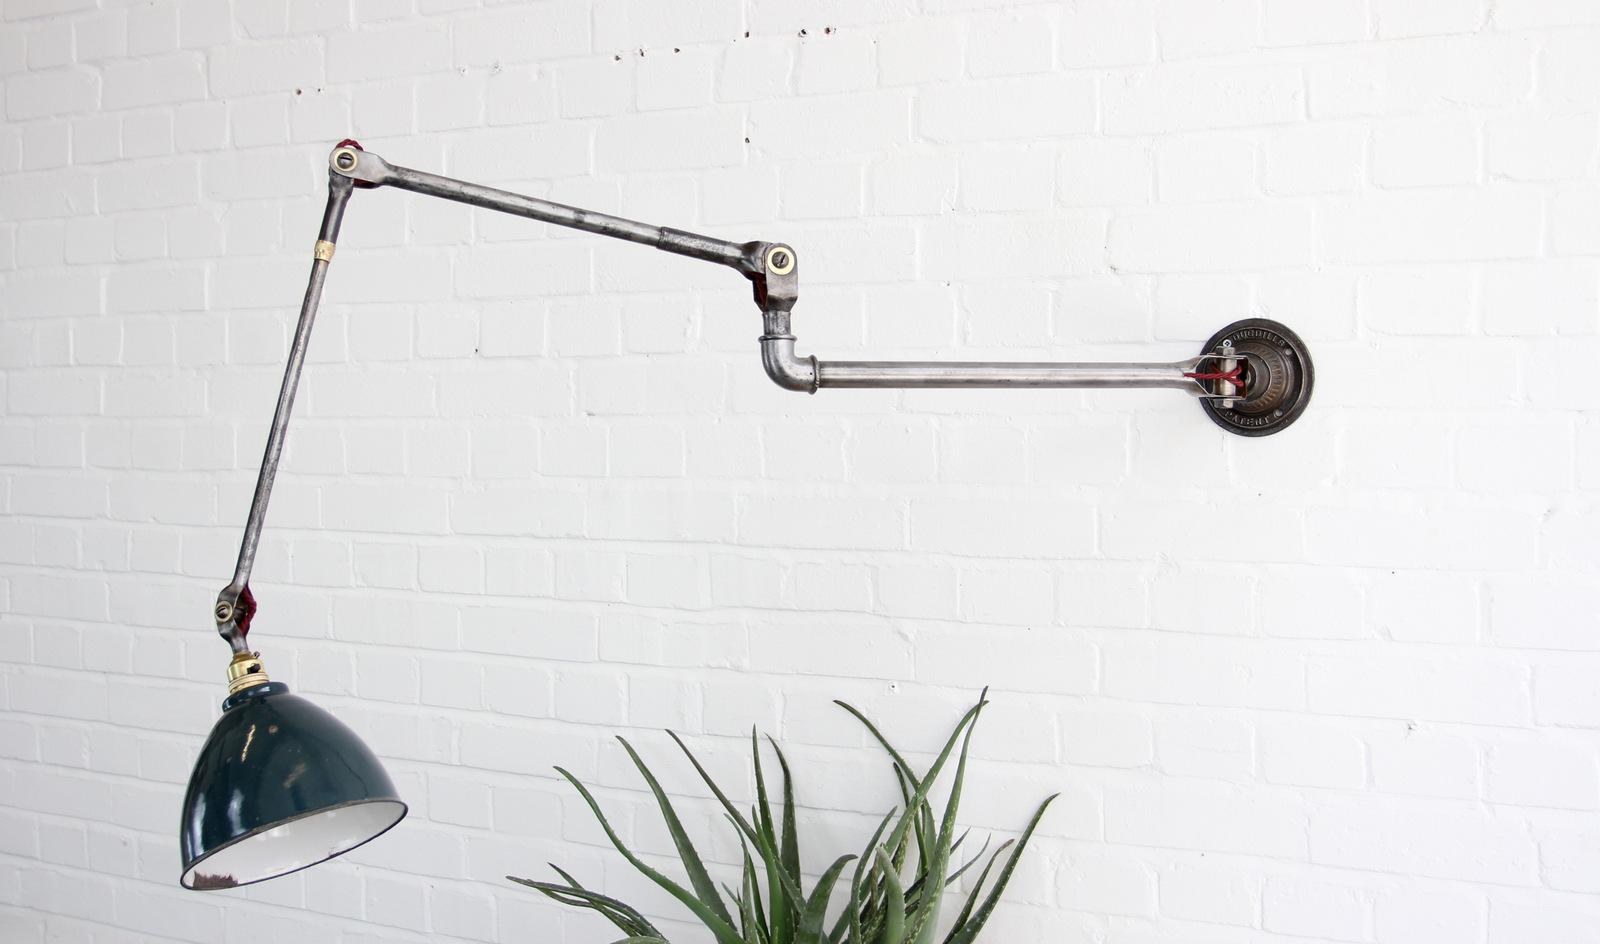 Large wall-mounted industrial task lamp by Dugdills, circa 1920s

- Vitreous green enamel shade
- Brushed steel articulated arms
- Scalloped base with embossed makers mark
- Takes B22 fitting bulbs
- Made by Dugdills
- English, circa 1920s
-